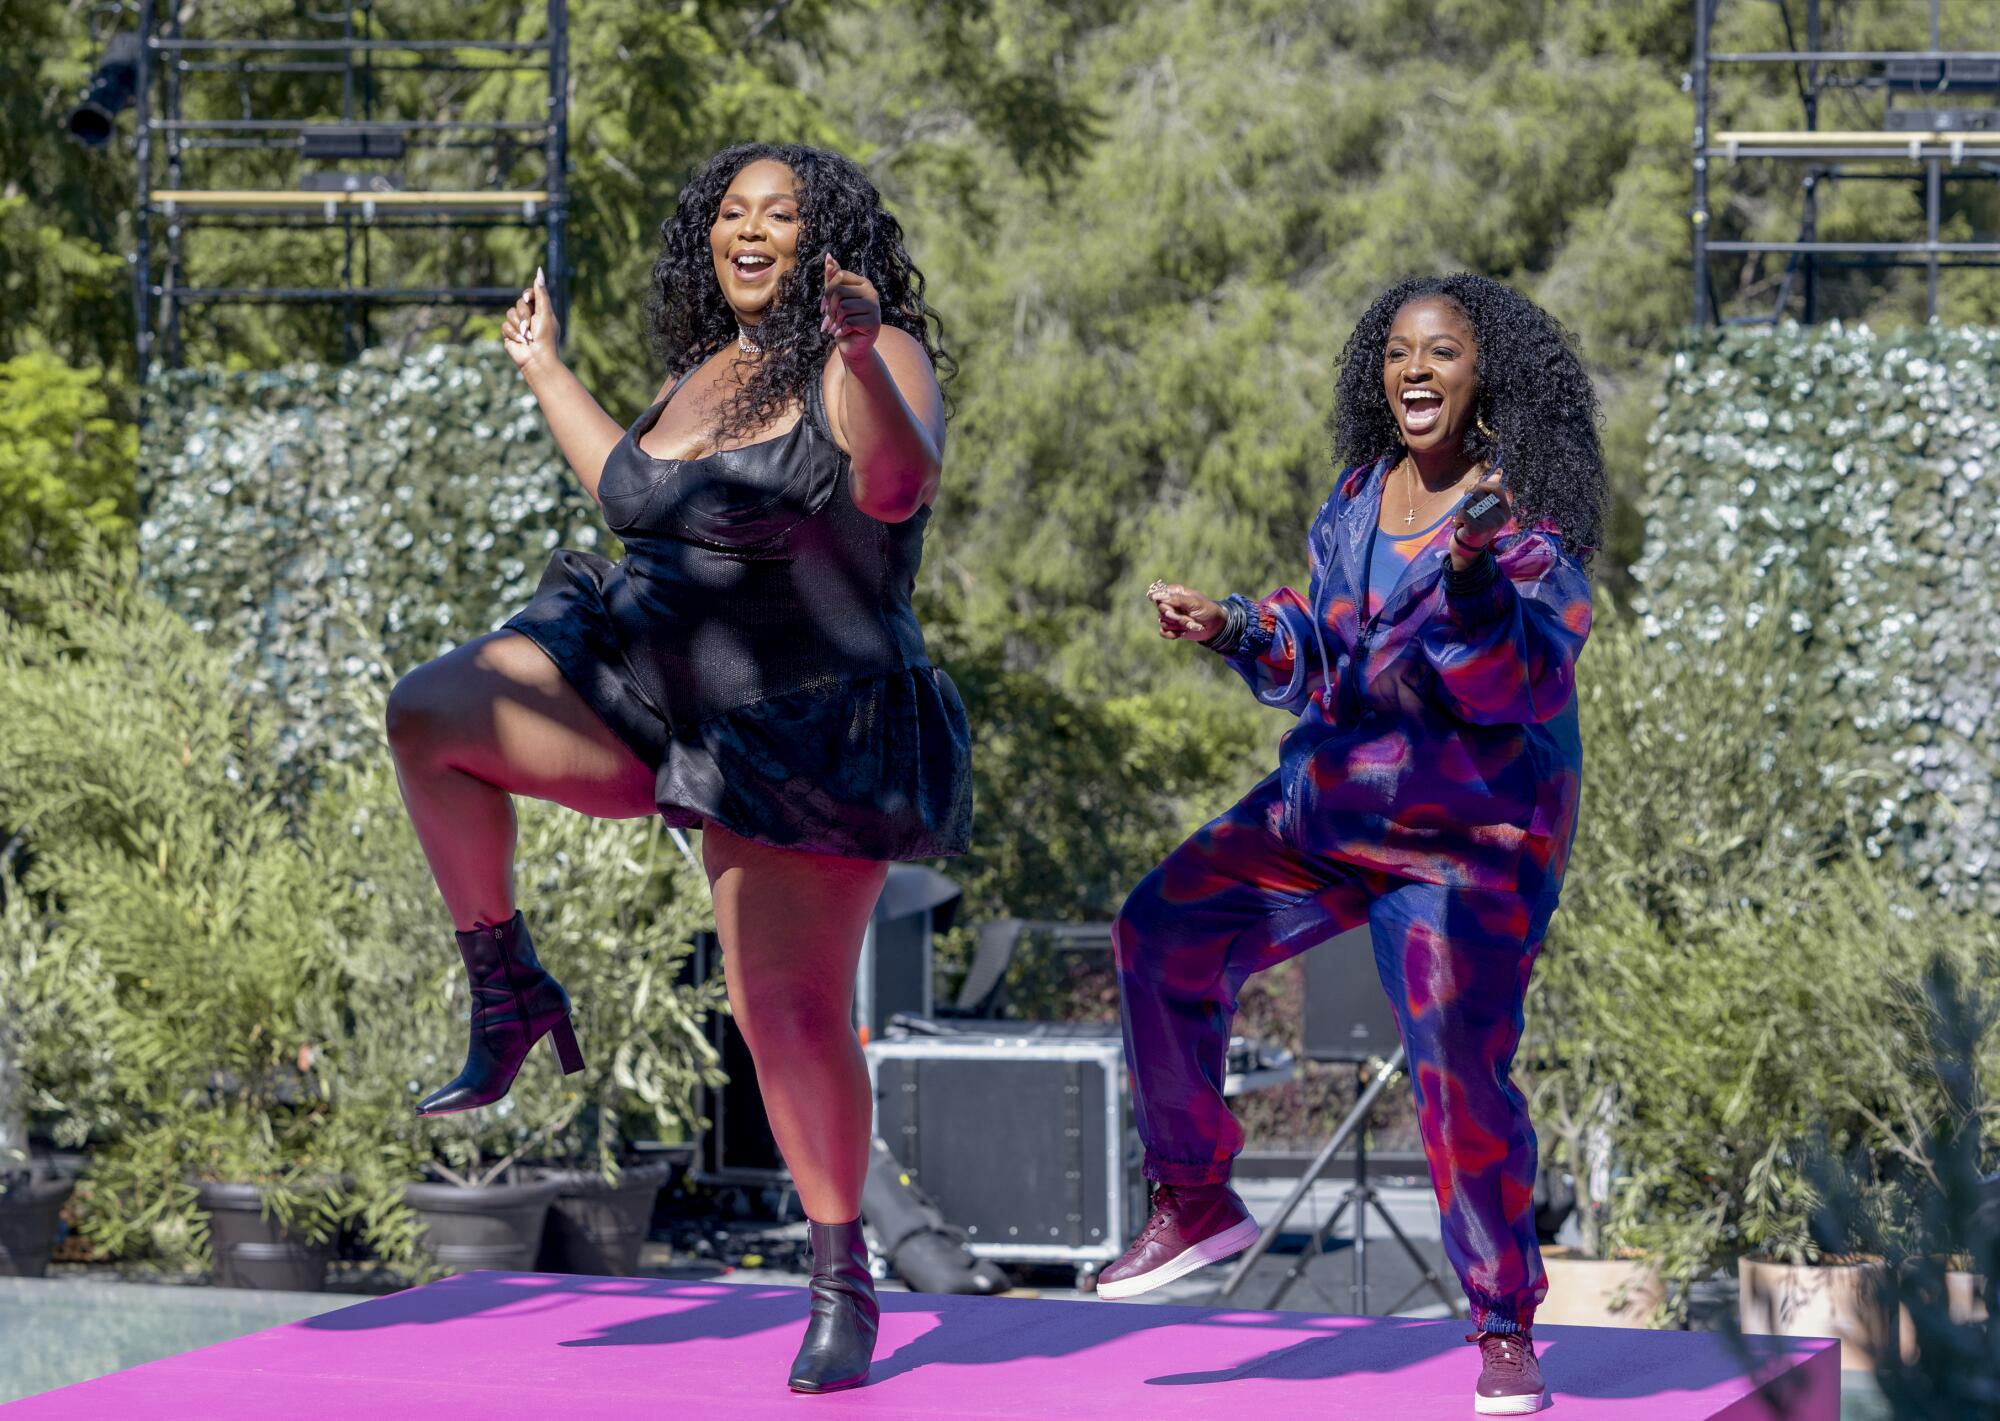 Two women dance on an outdoor stage